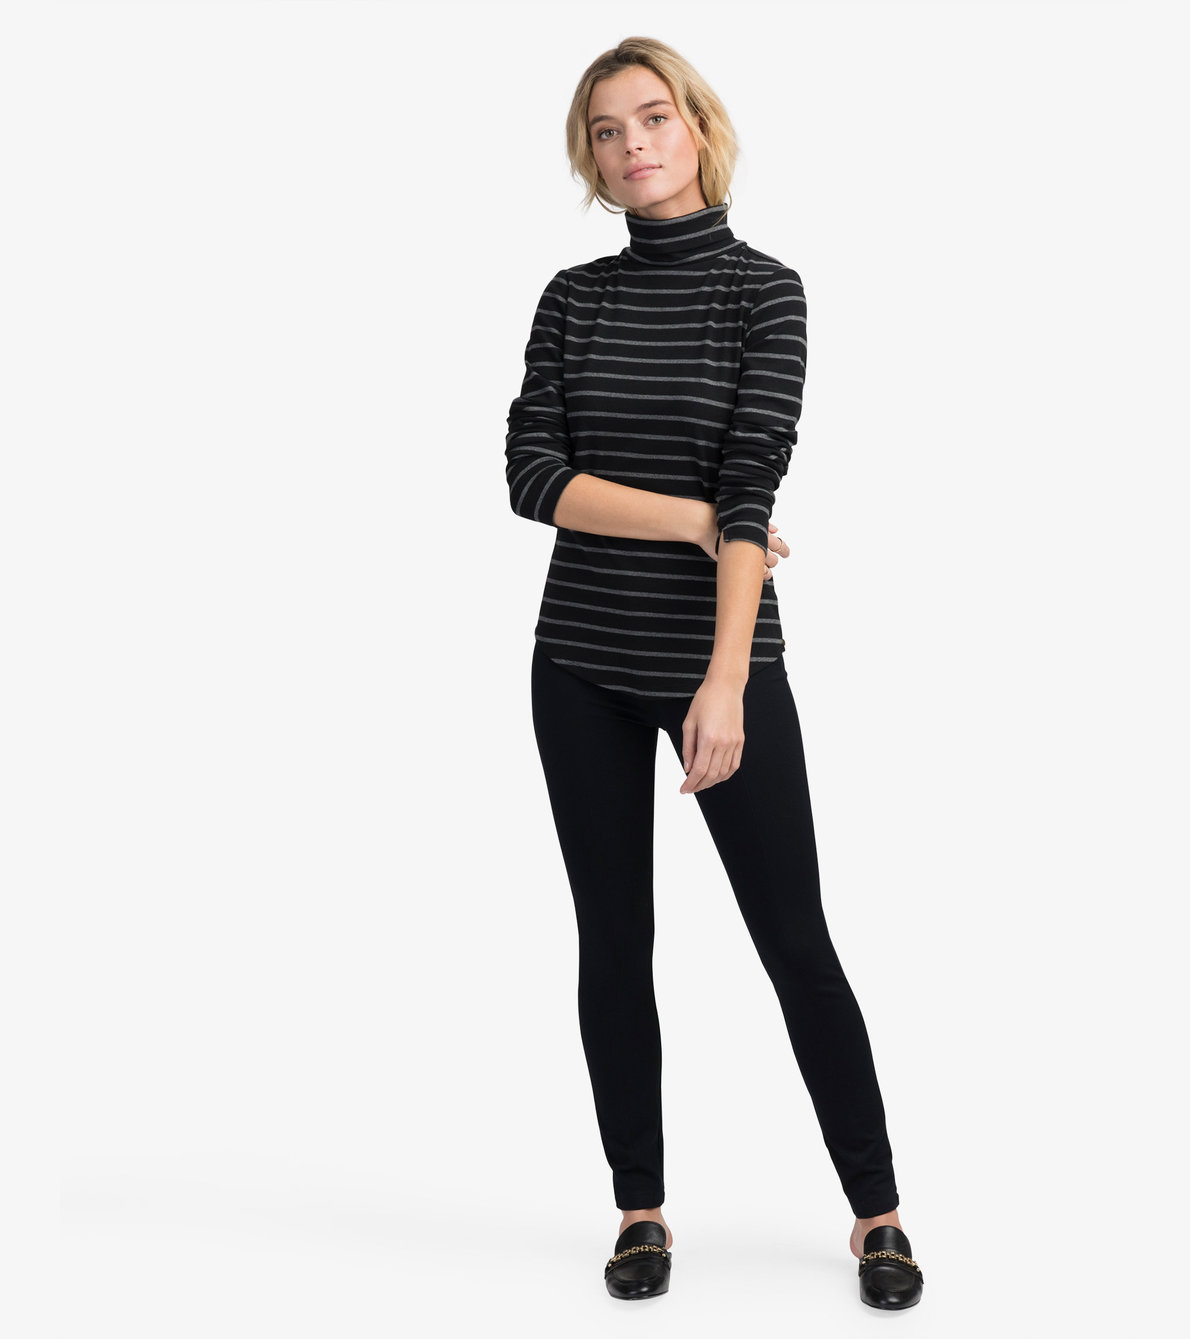 View larger image of Black and Charcoal Stripes Turtleneck